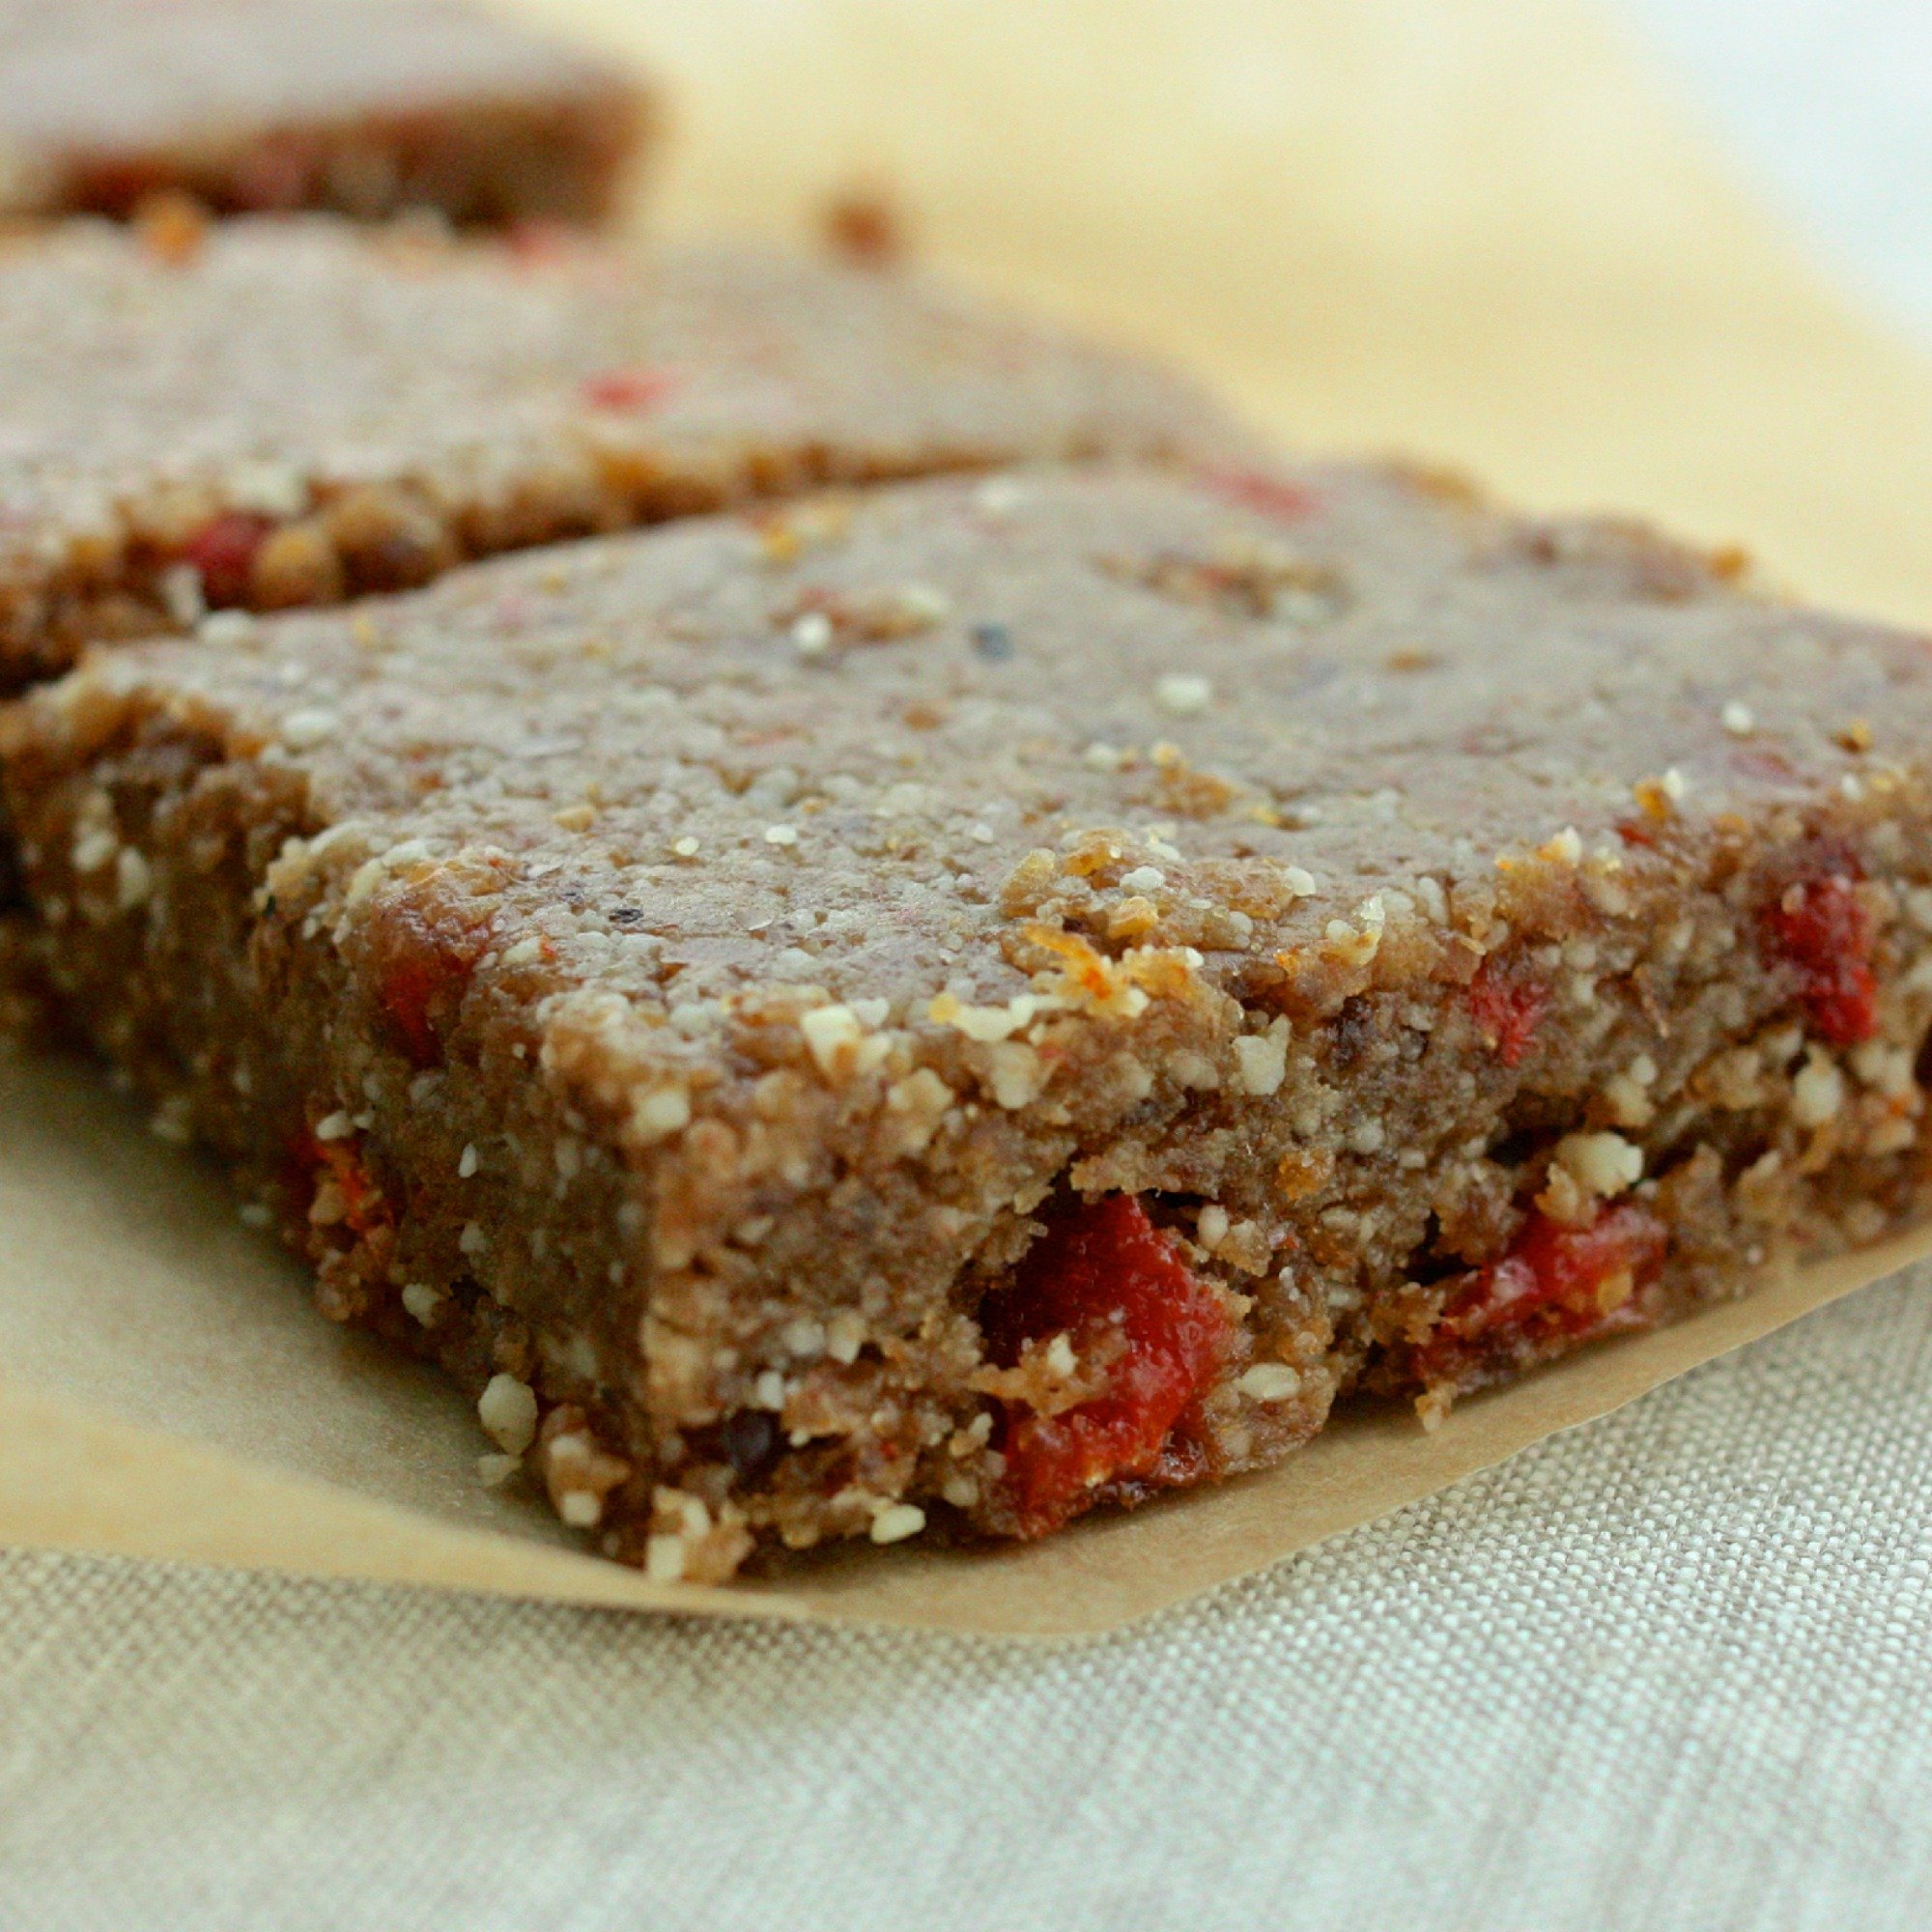 Higher Protein Raw, Vegan Snack Bars. Easy to Customize! | The Full Helping